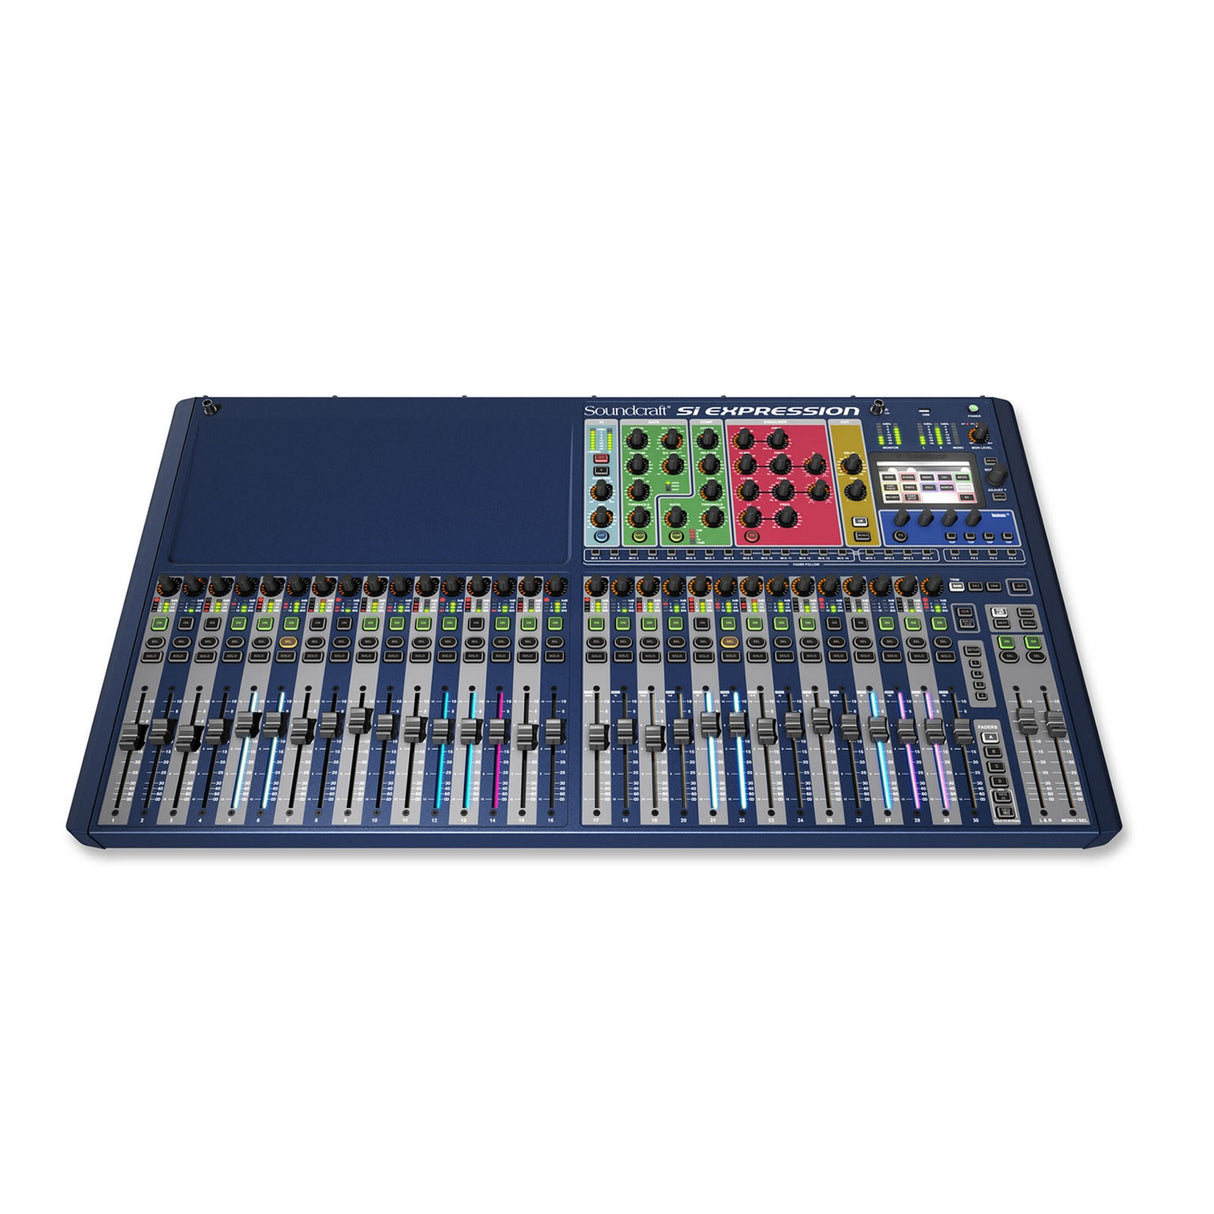 Soundcraft Si Expression 3 32-Channel Digital Console